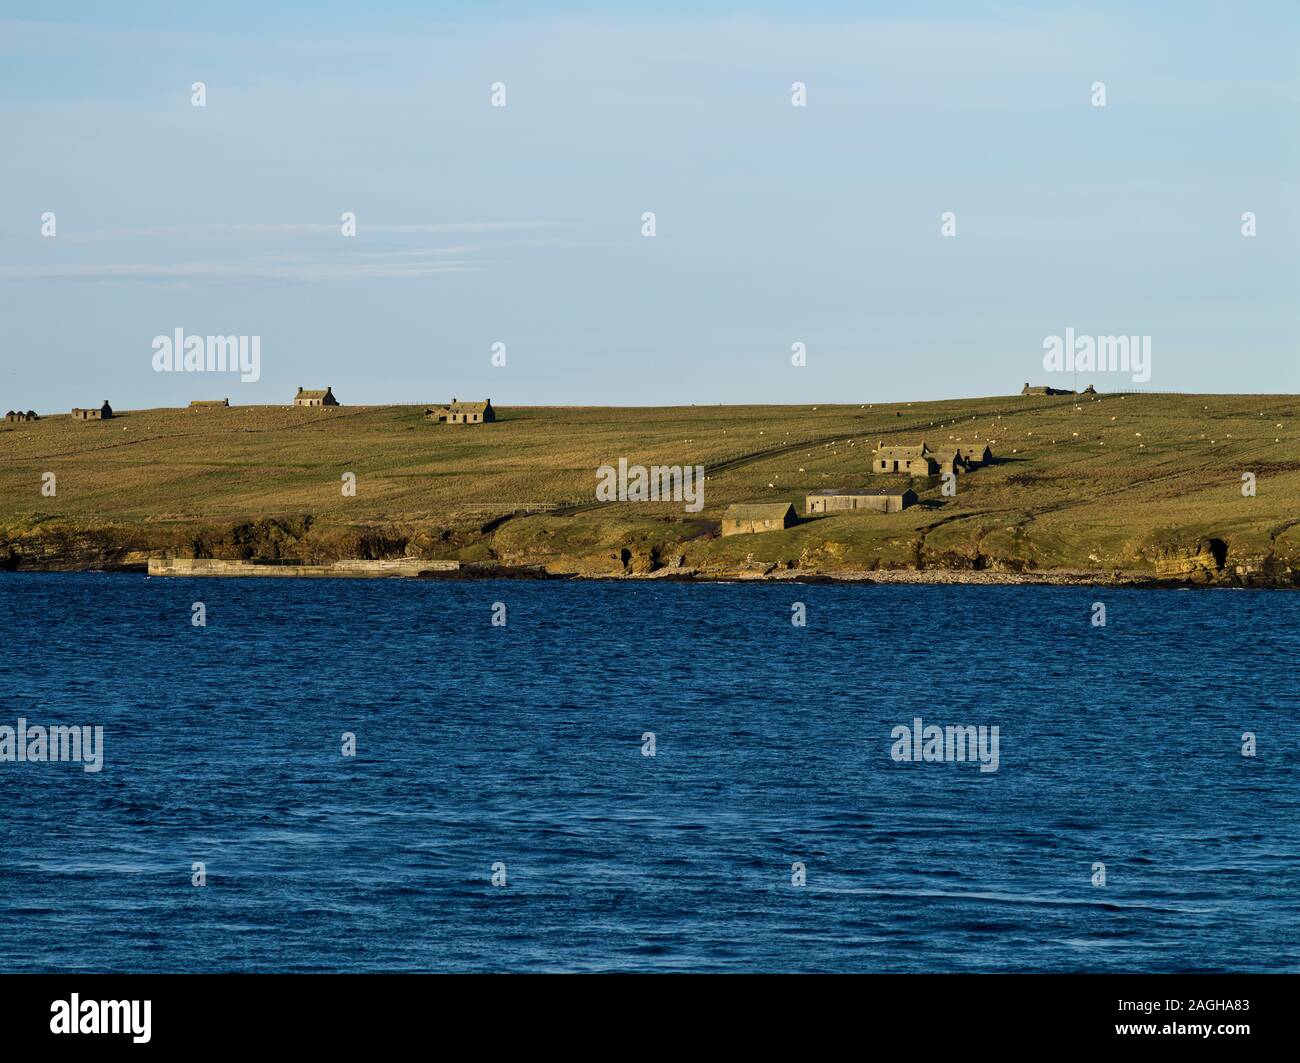 dh Uninhabited Scottish islands STROMA ISLAND CAITHNESS Pier with abandoned derelict cottages Scotland unpopulated cottage community Stock Photo